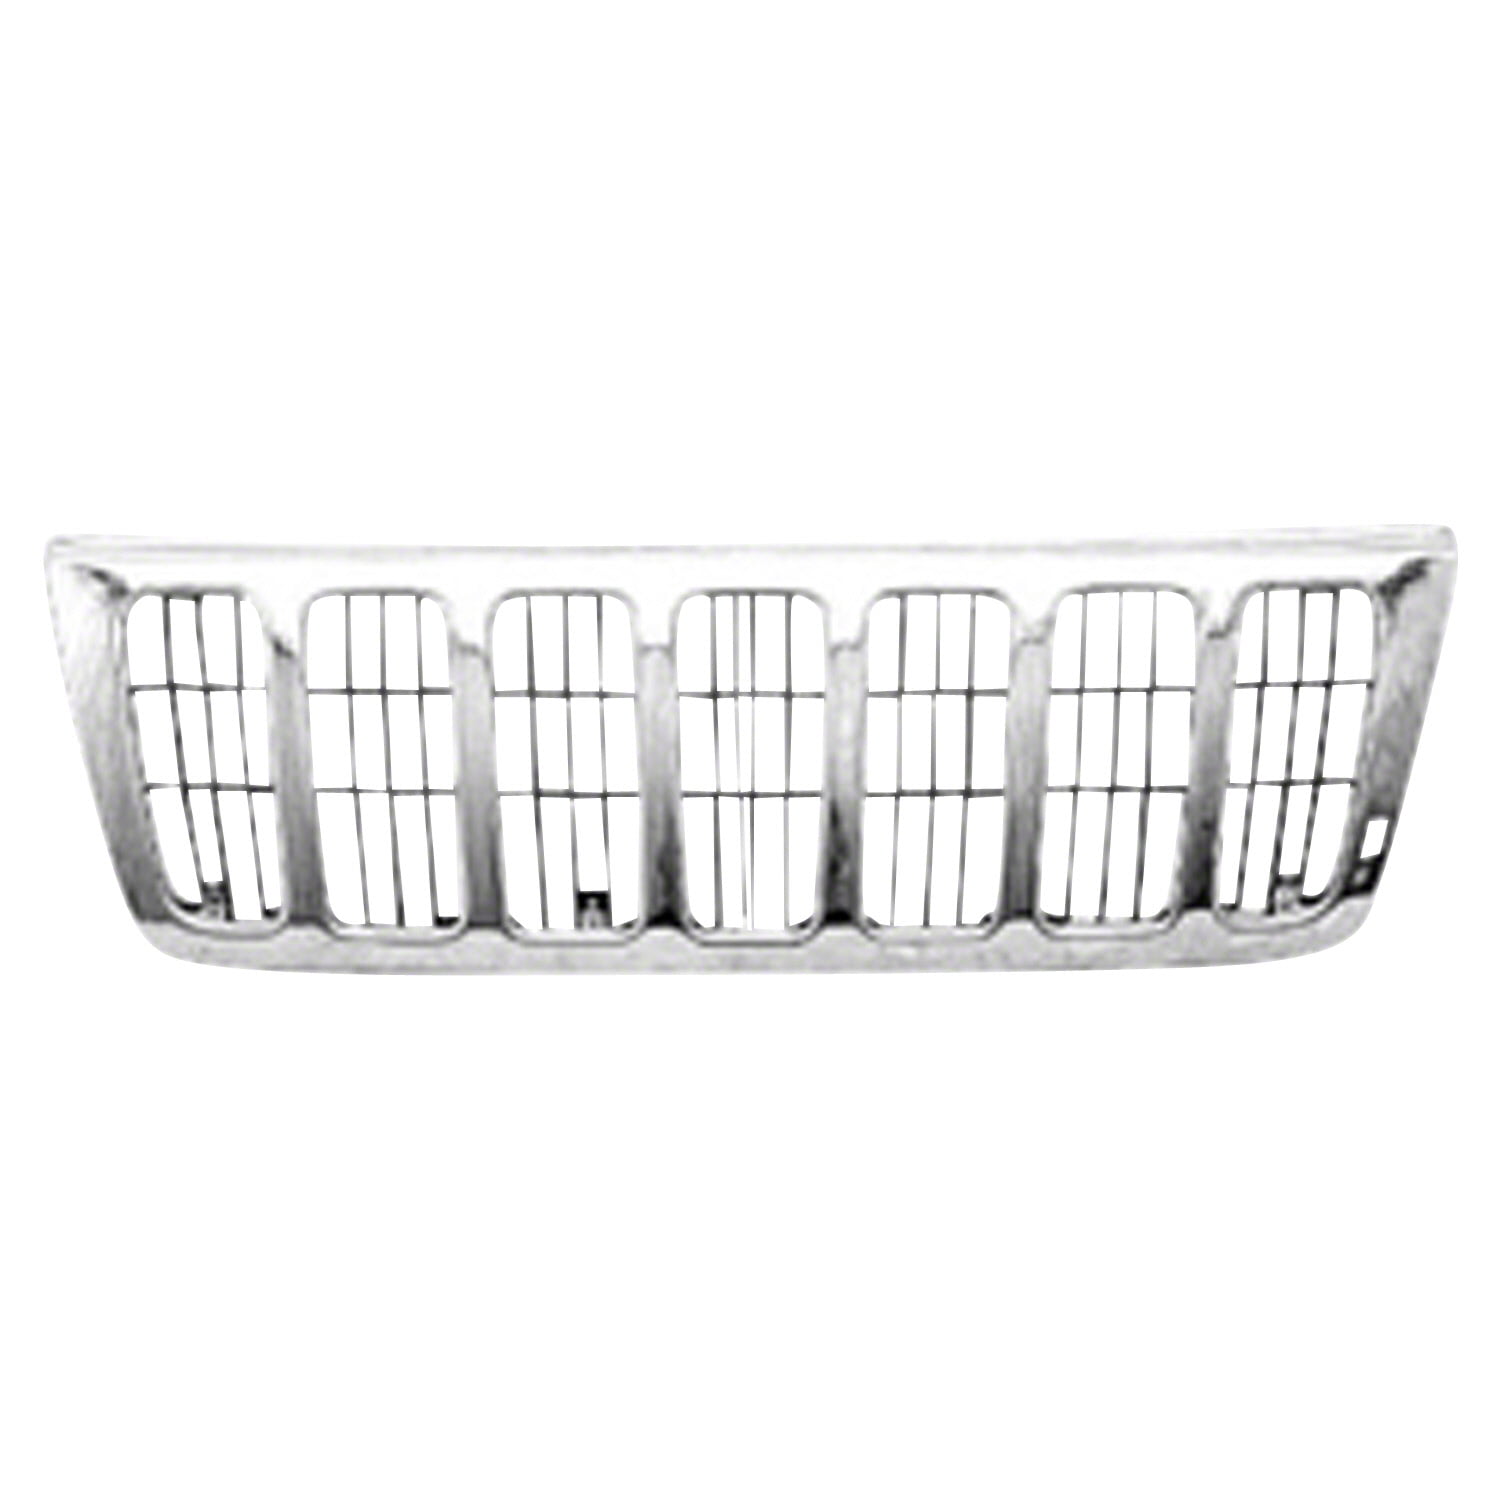 New Grille Shell For Jeep Grand Cherokee 1999-2003 CH1200221